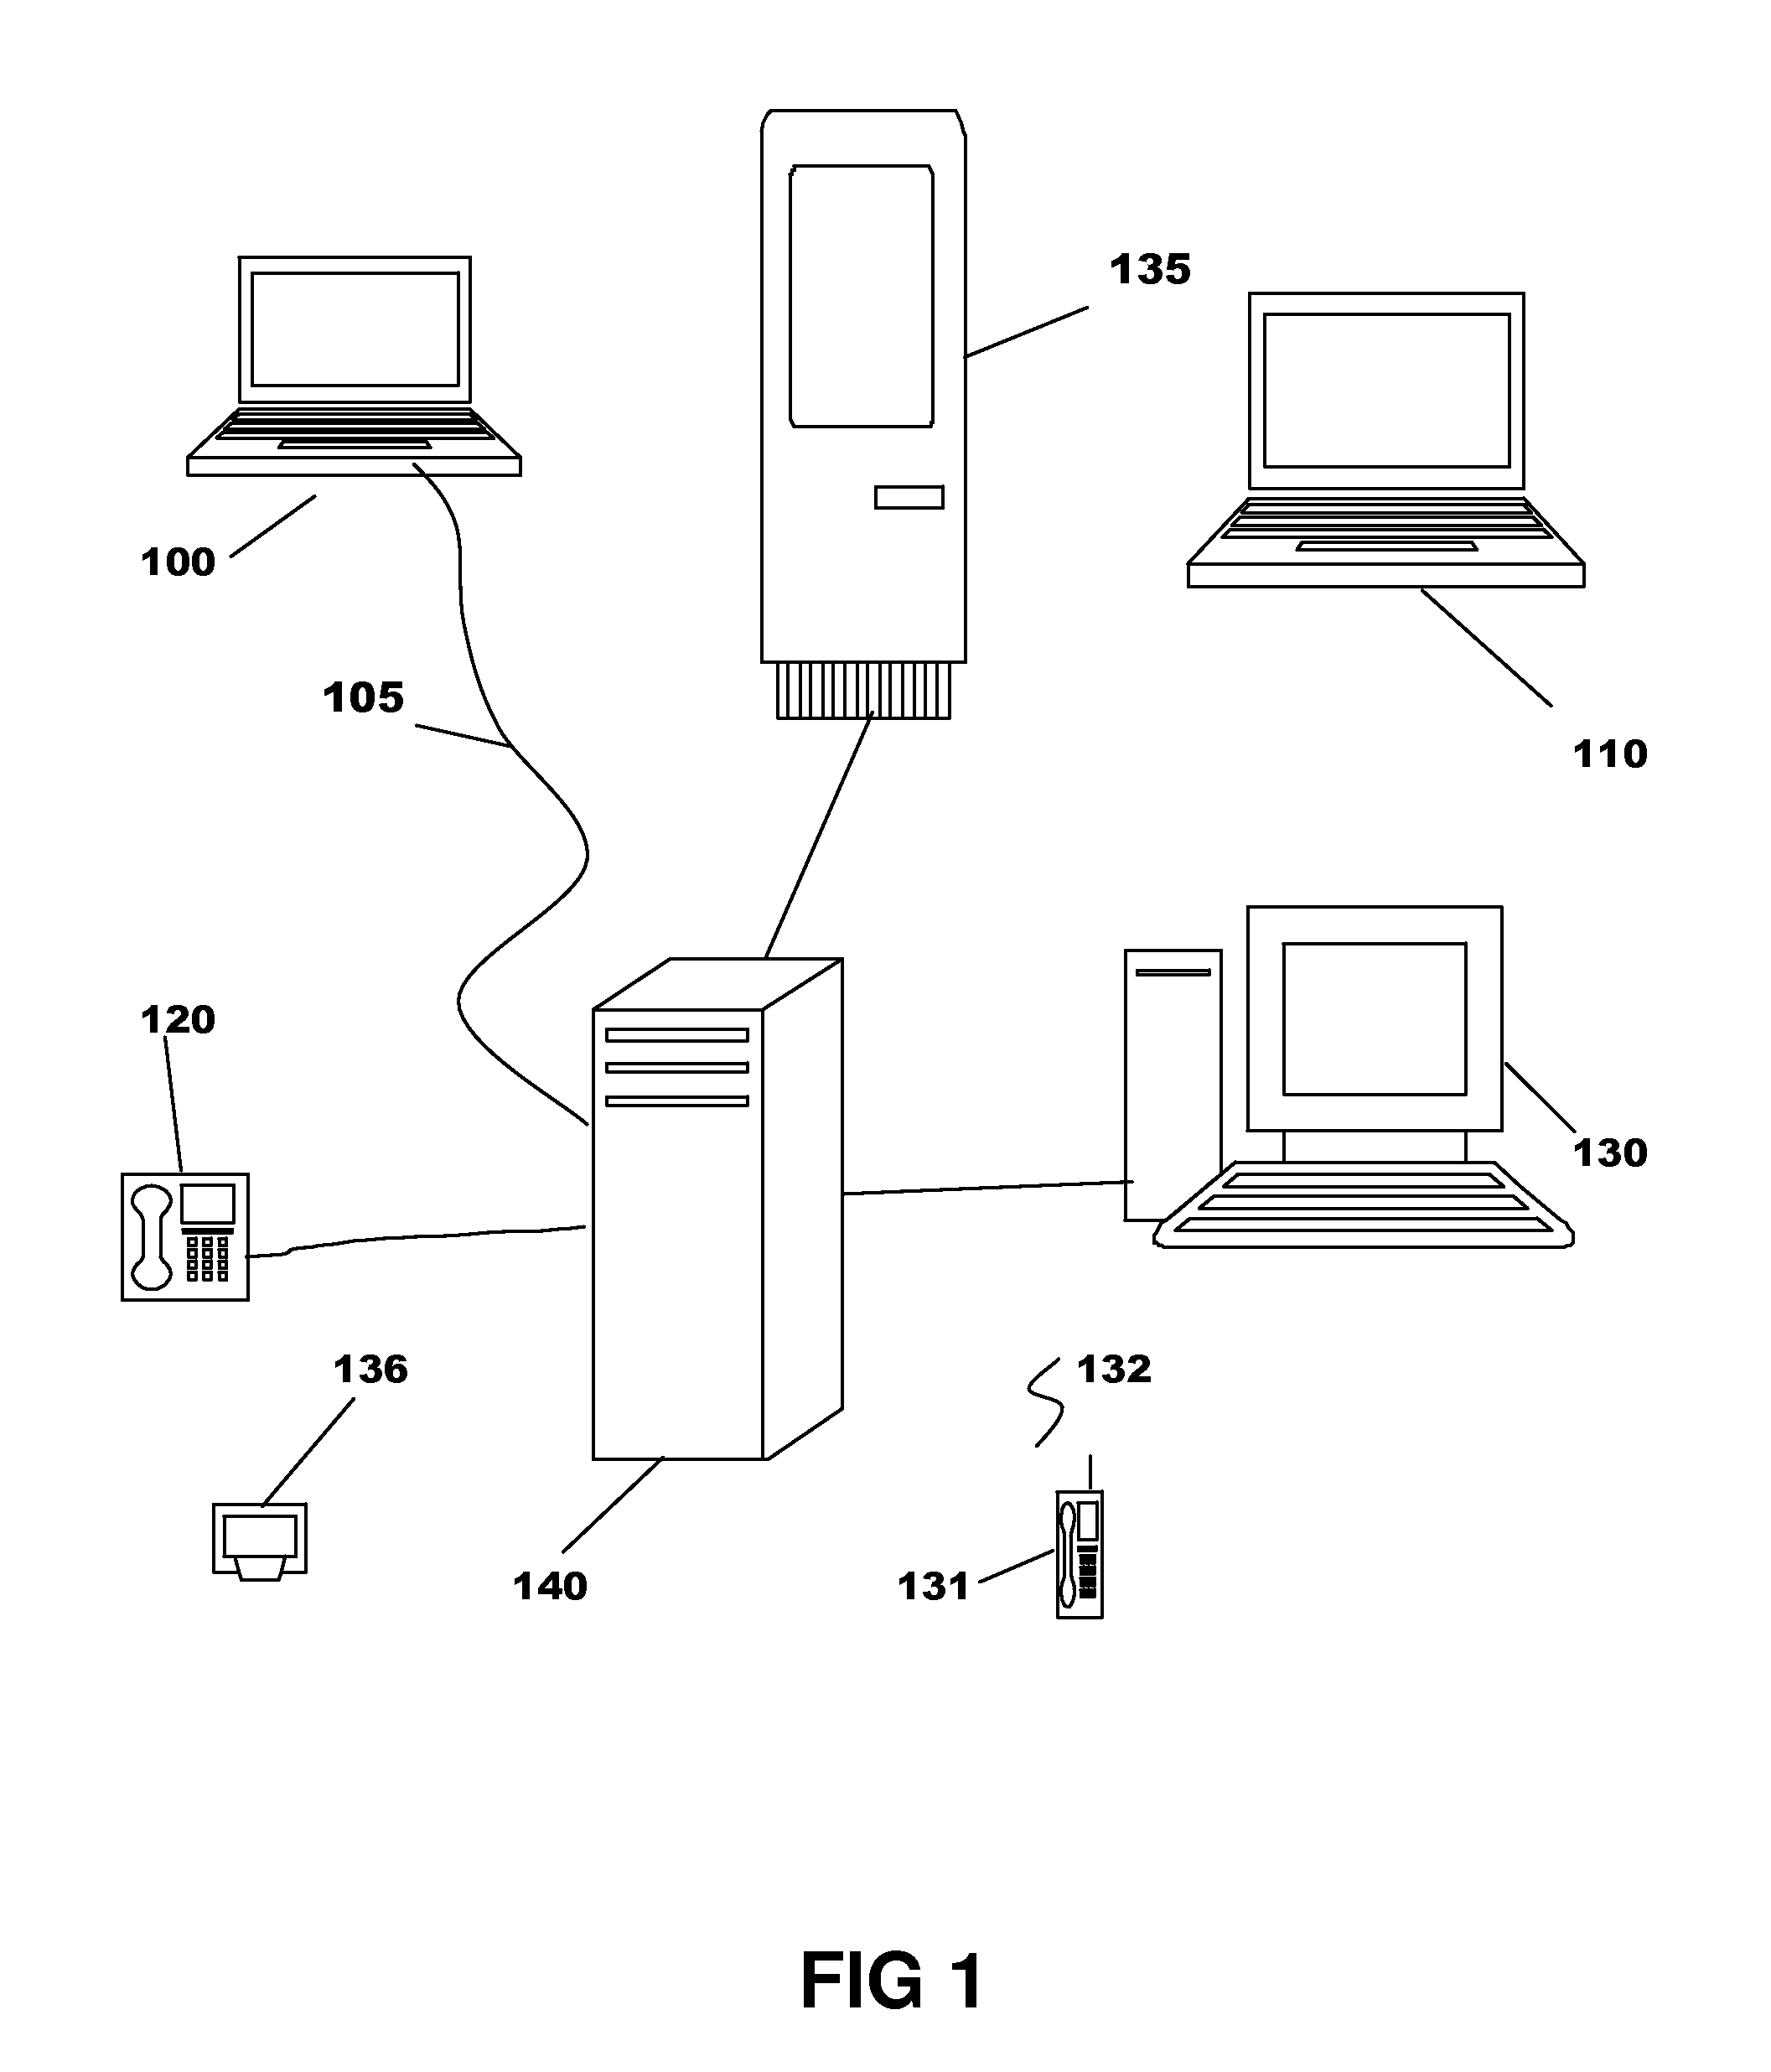 Travel forecasting and allocating system and method